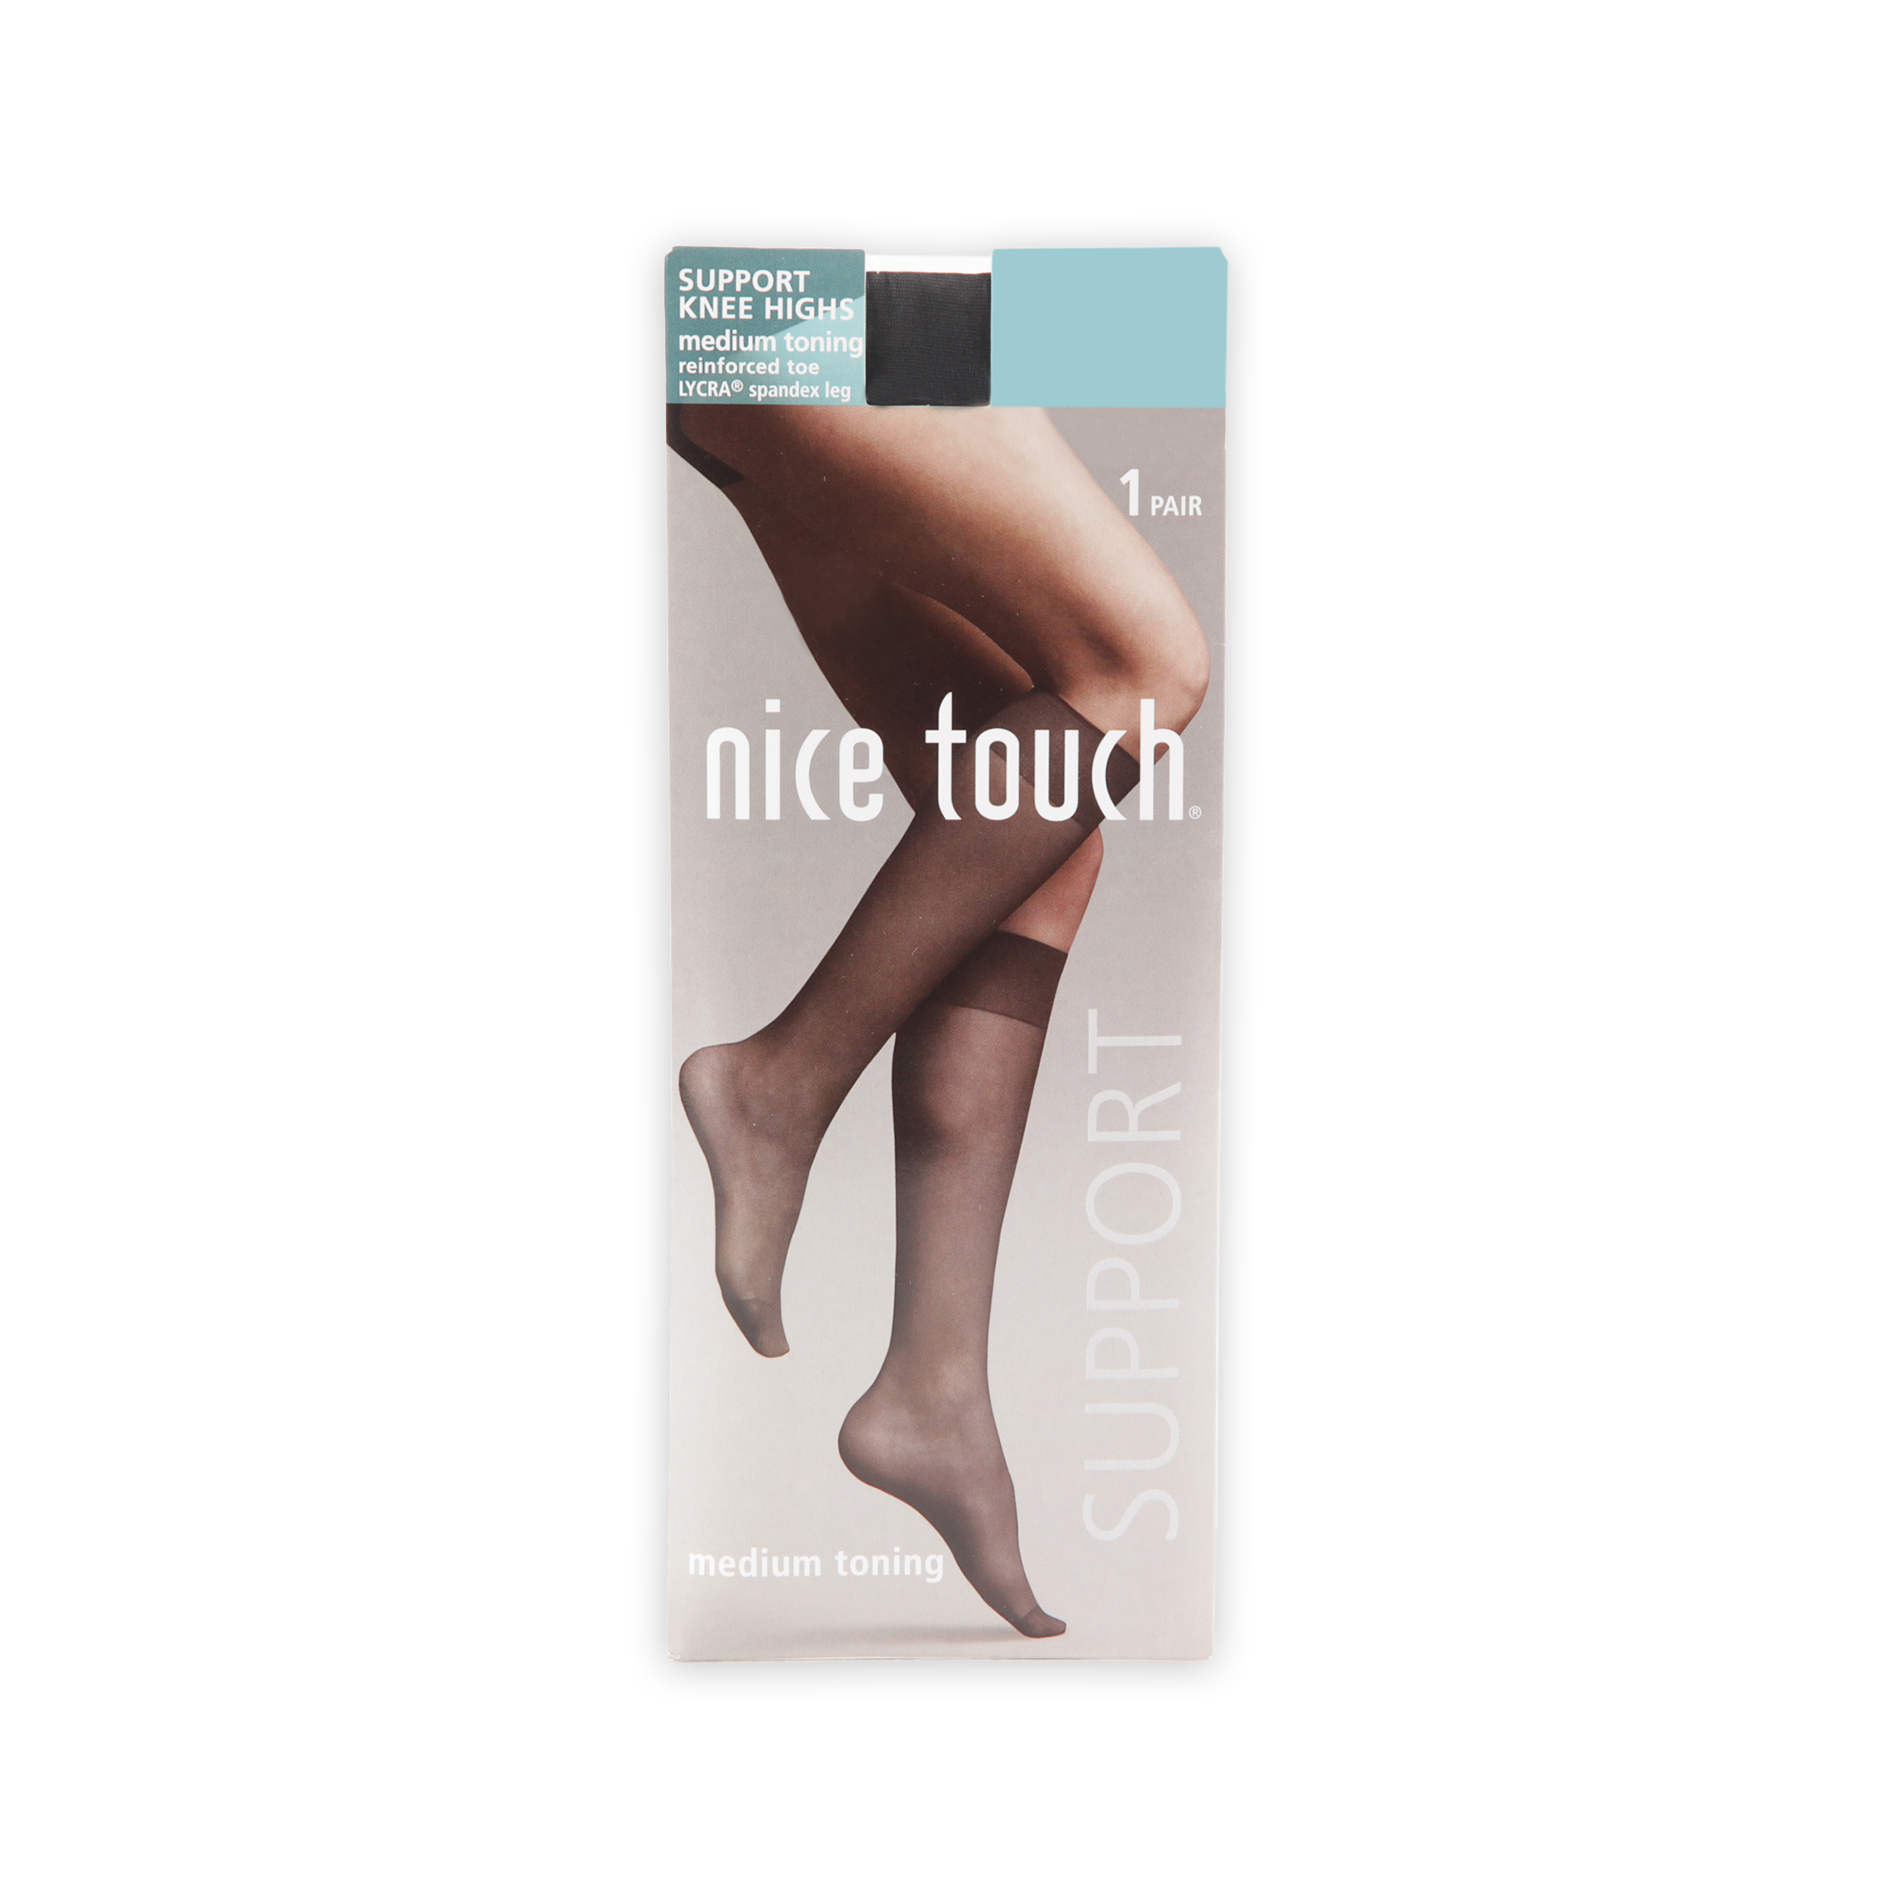 Nice Touch Women's Knee Highs Support Medium Toning